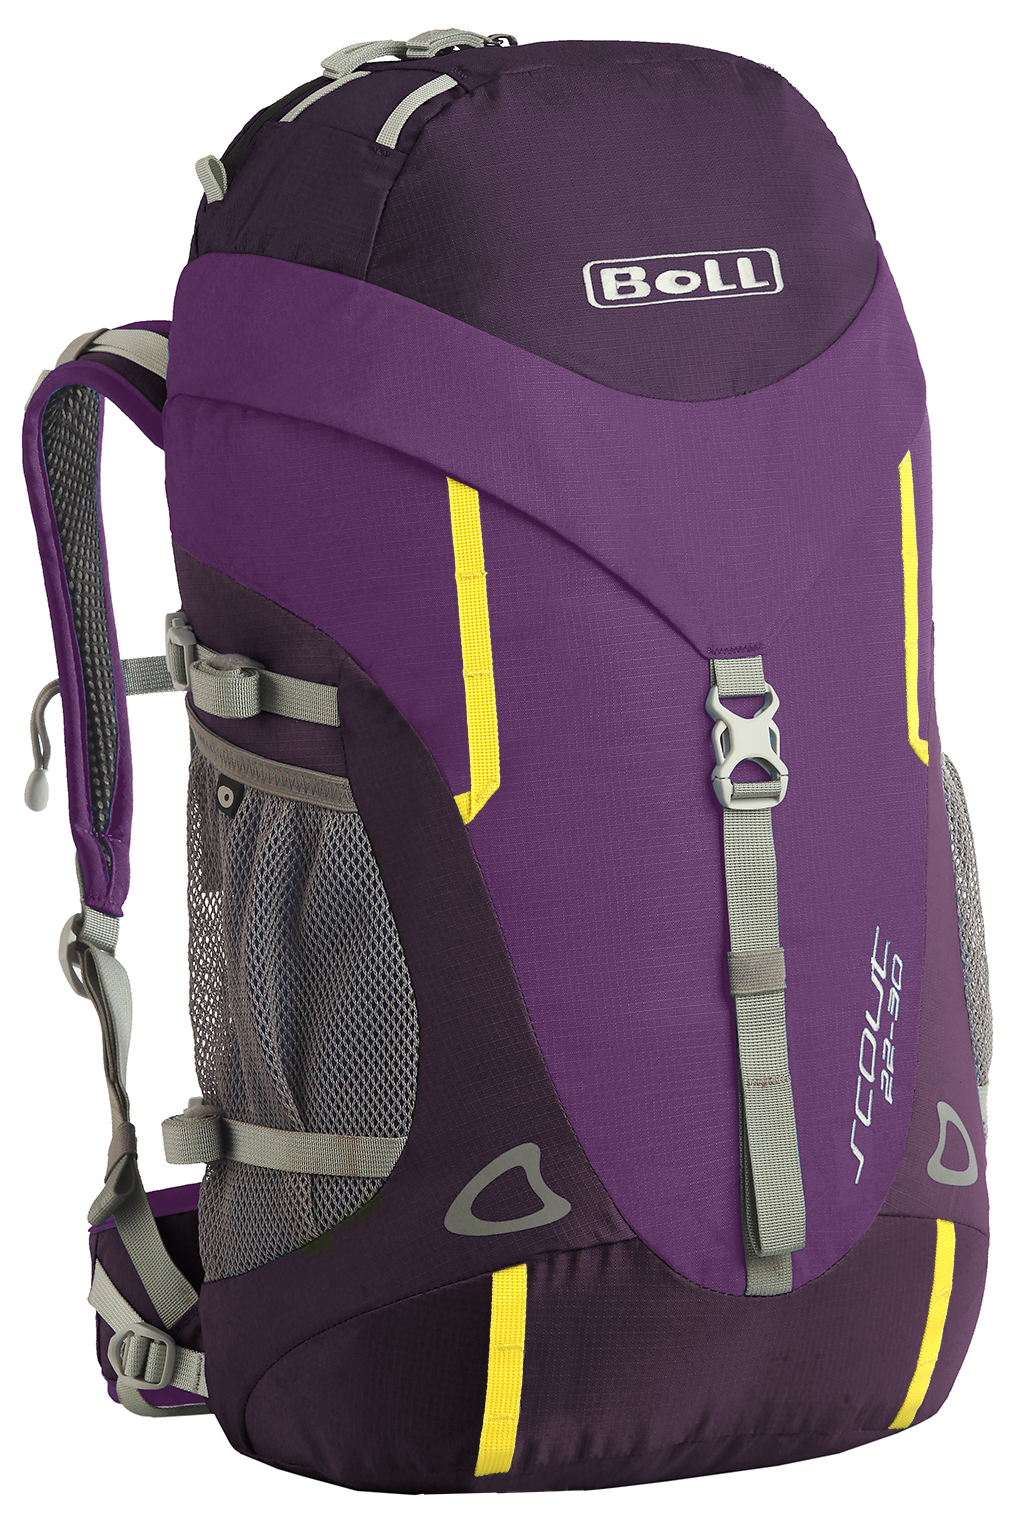 Boll SCOUT 22-30 - violet